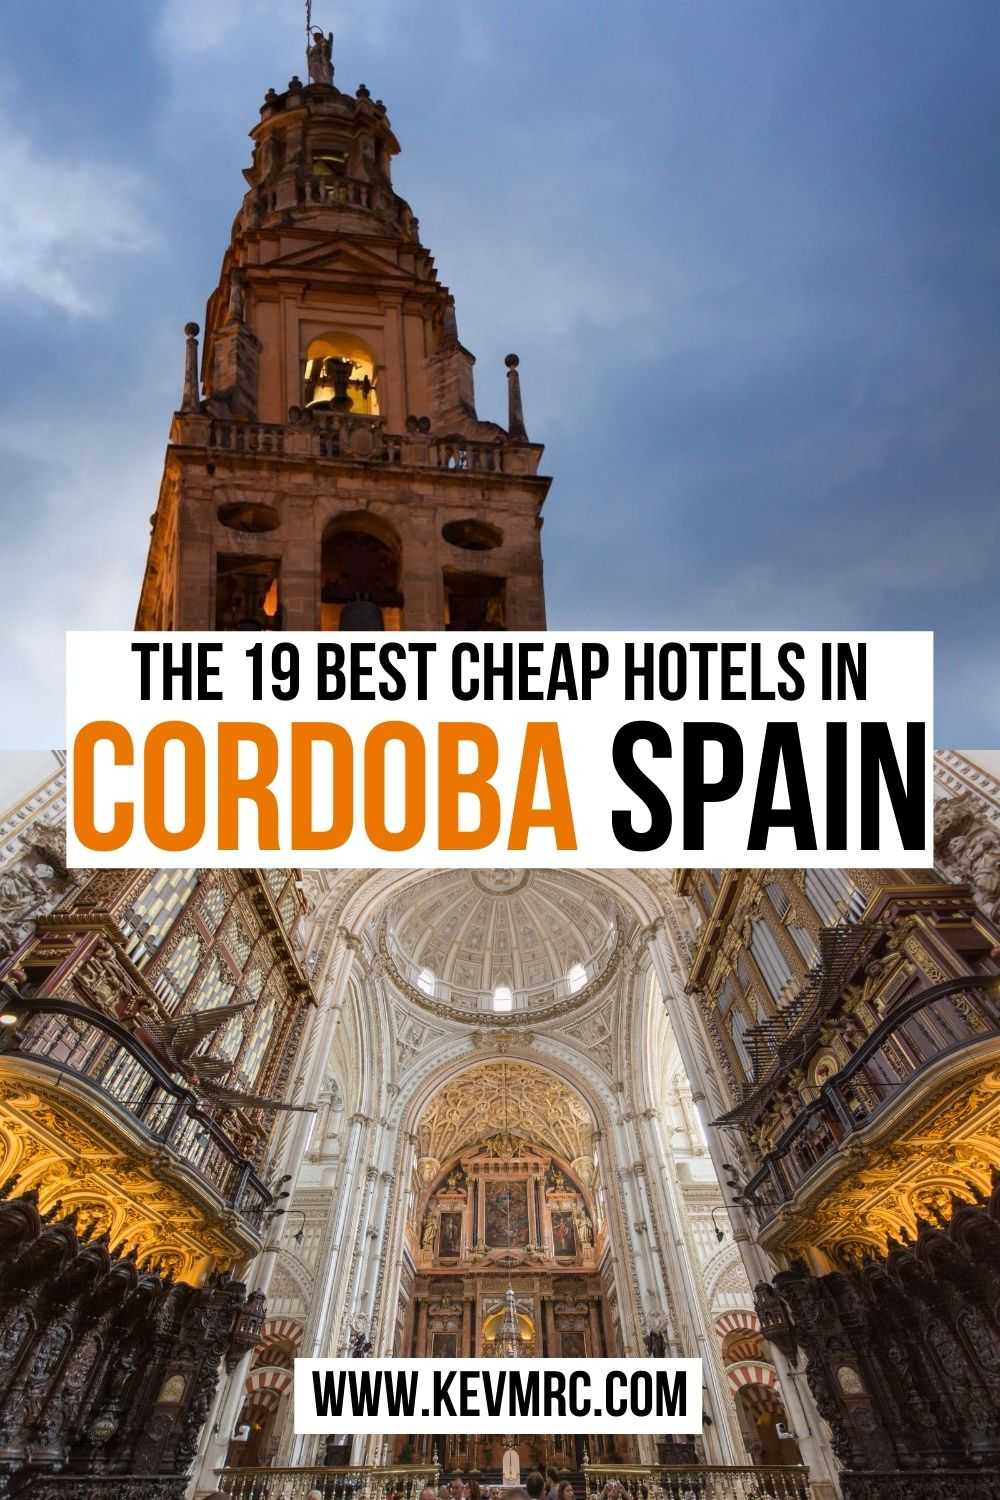 Cordoba is a great Andalusian city with great landmarks and monuments you'll love discovering, even when traveling on a budget. Because in Cordoba, the good news is that you can travel without spending too much, and I'll help you spare money on accommodation with this guide. Find the best cheap hotel in Cordoba for you.